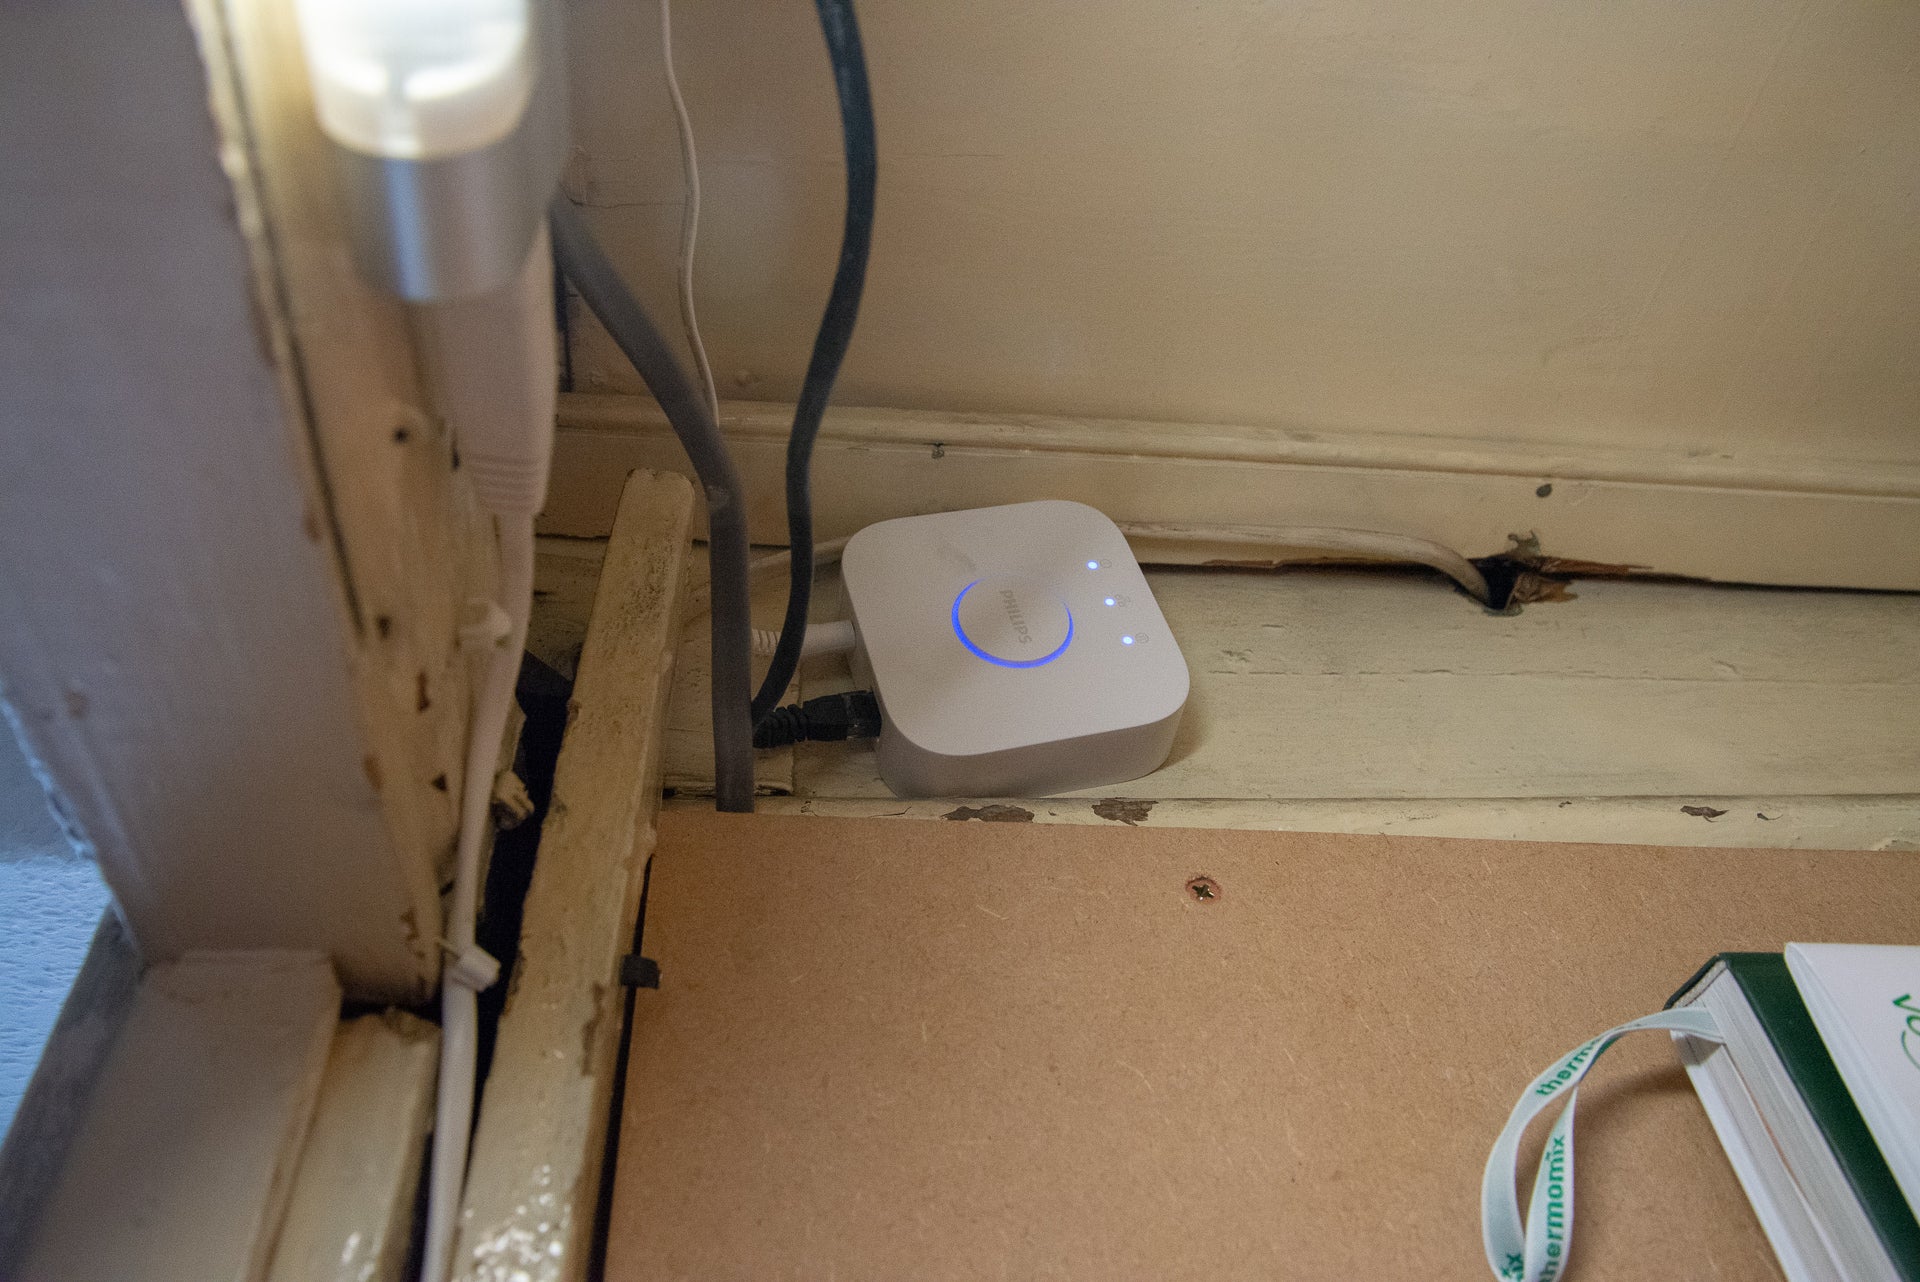 Build a smart home extension hubs in a cupboard